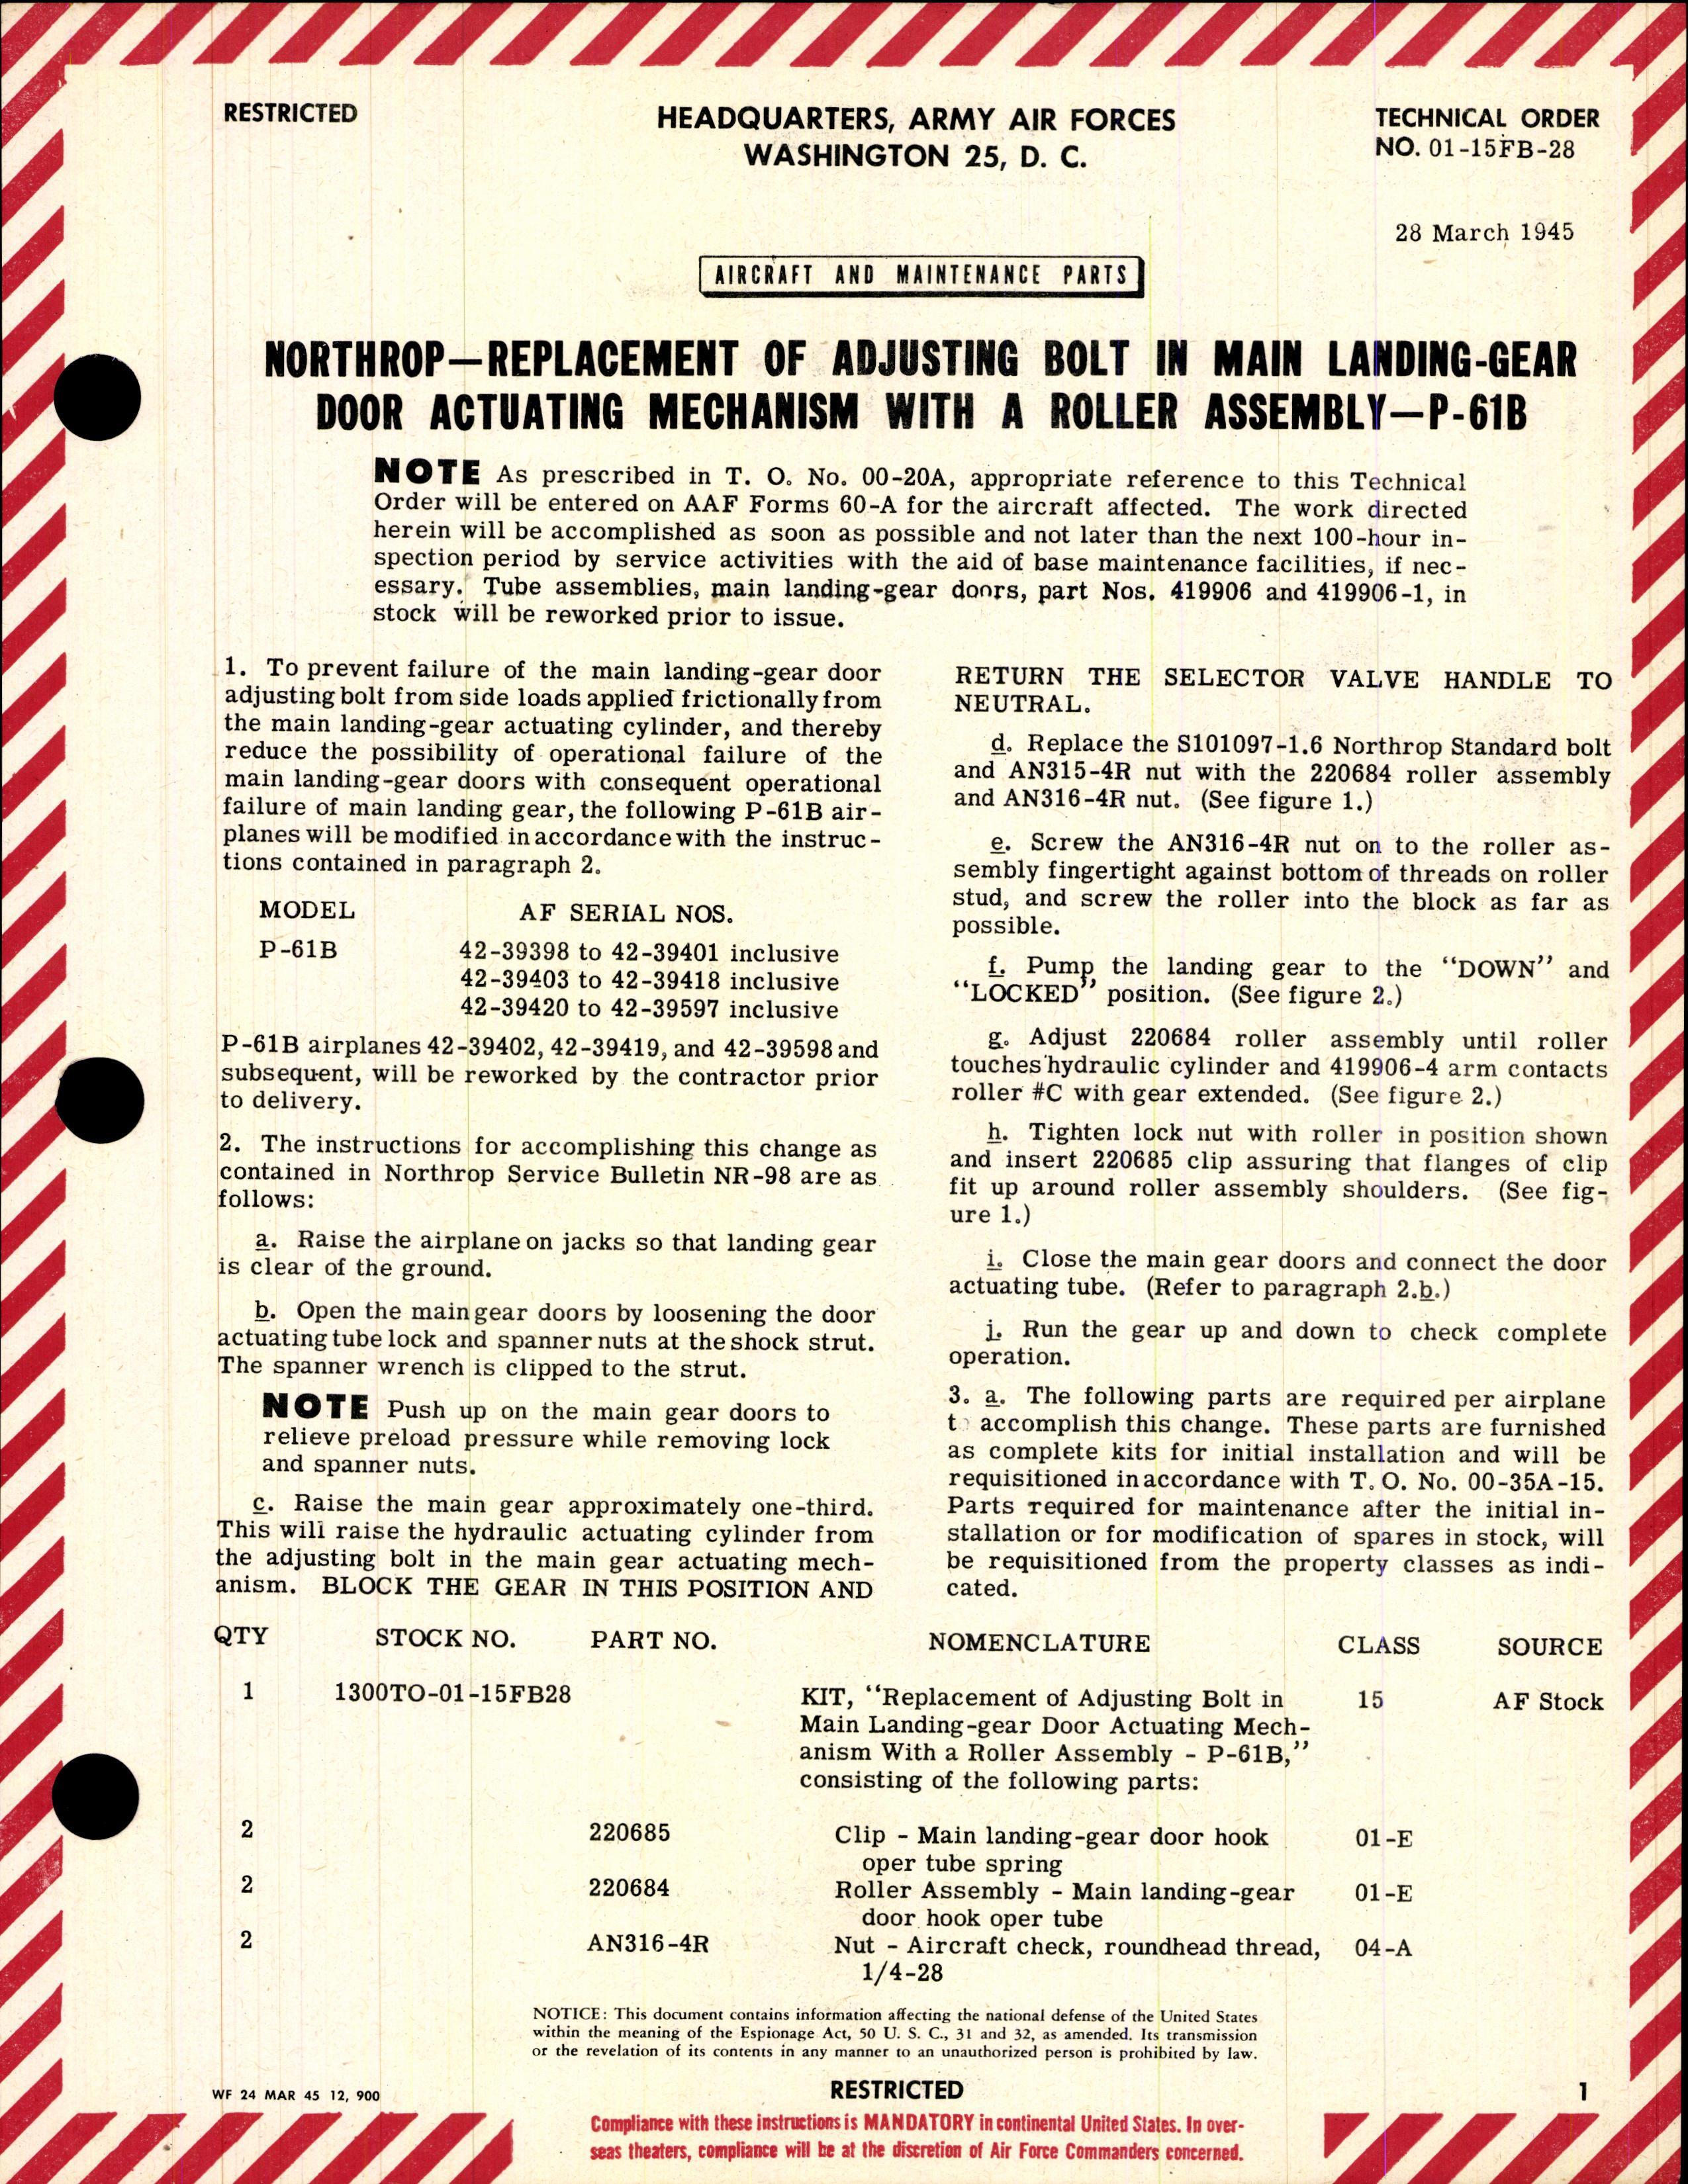 Sample page 1 from AirCorps Library document: Replacement of Adjusting Bolt in Main Landing-Gear Door Actuating Mechanism with a Roller Assembly for P-61B